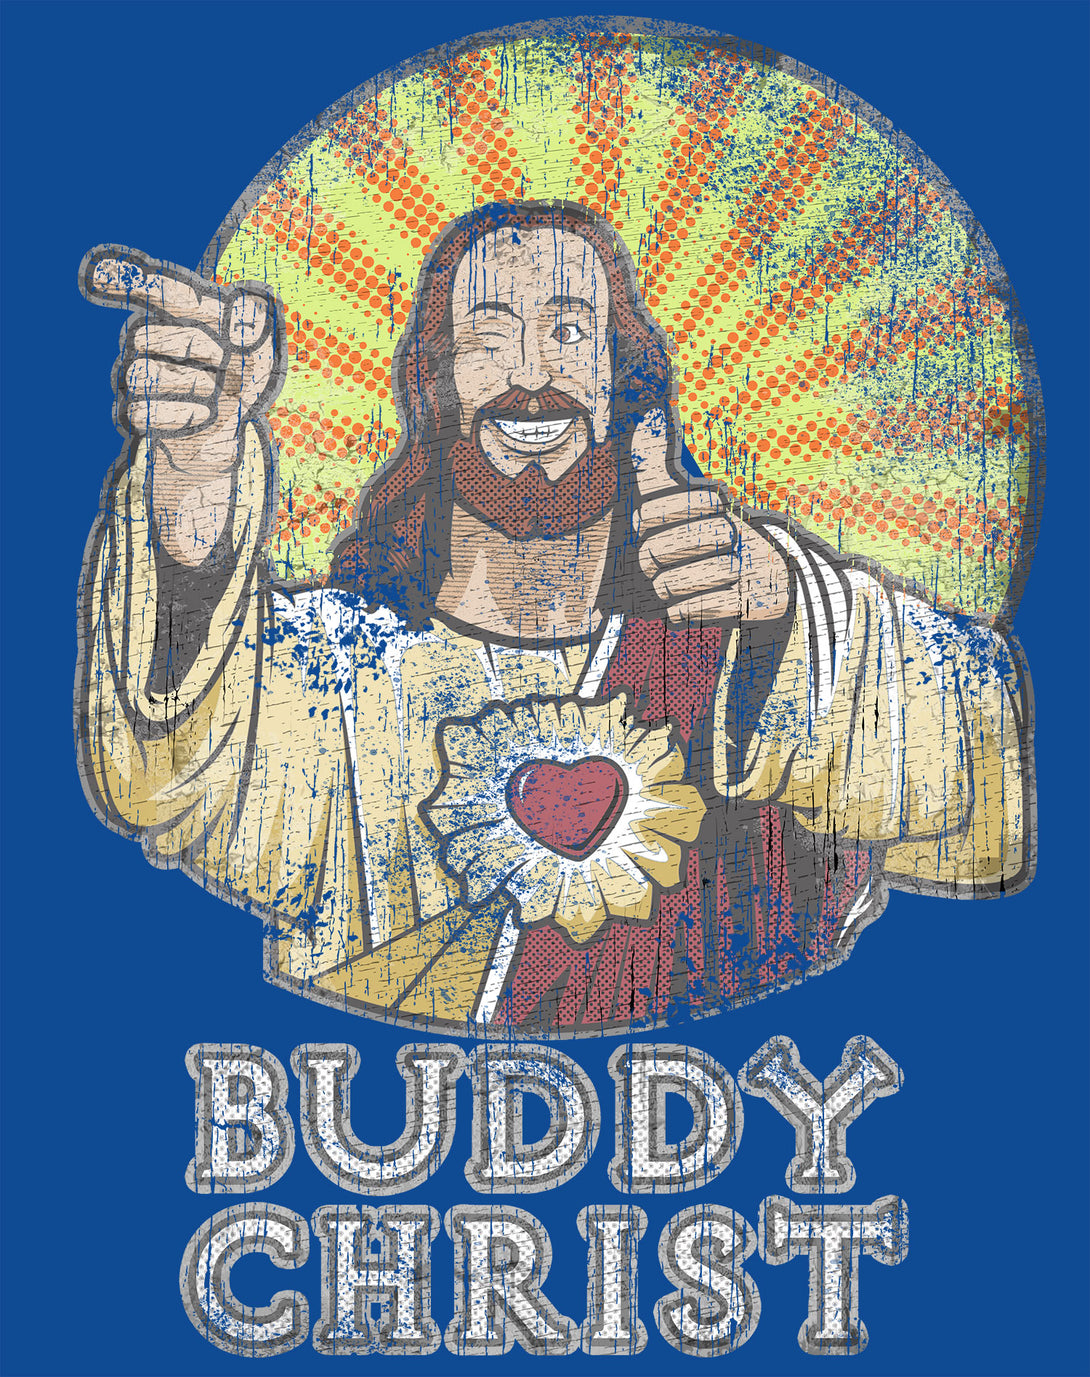 Kevin Smith View Askewniverse Buddy Christ Got Summer Vintage Variant Official Women's T-Shirt Blue - Urban Species Design Close Up